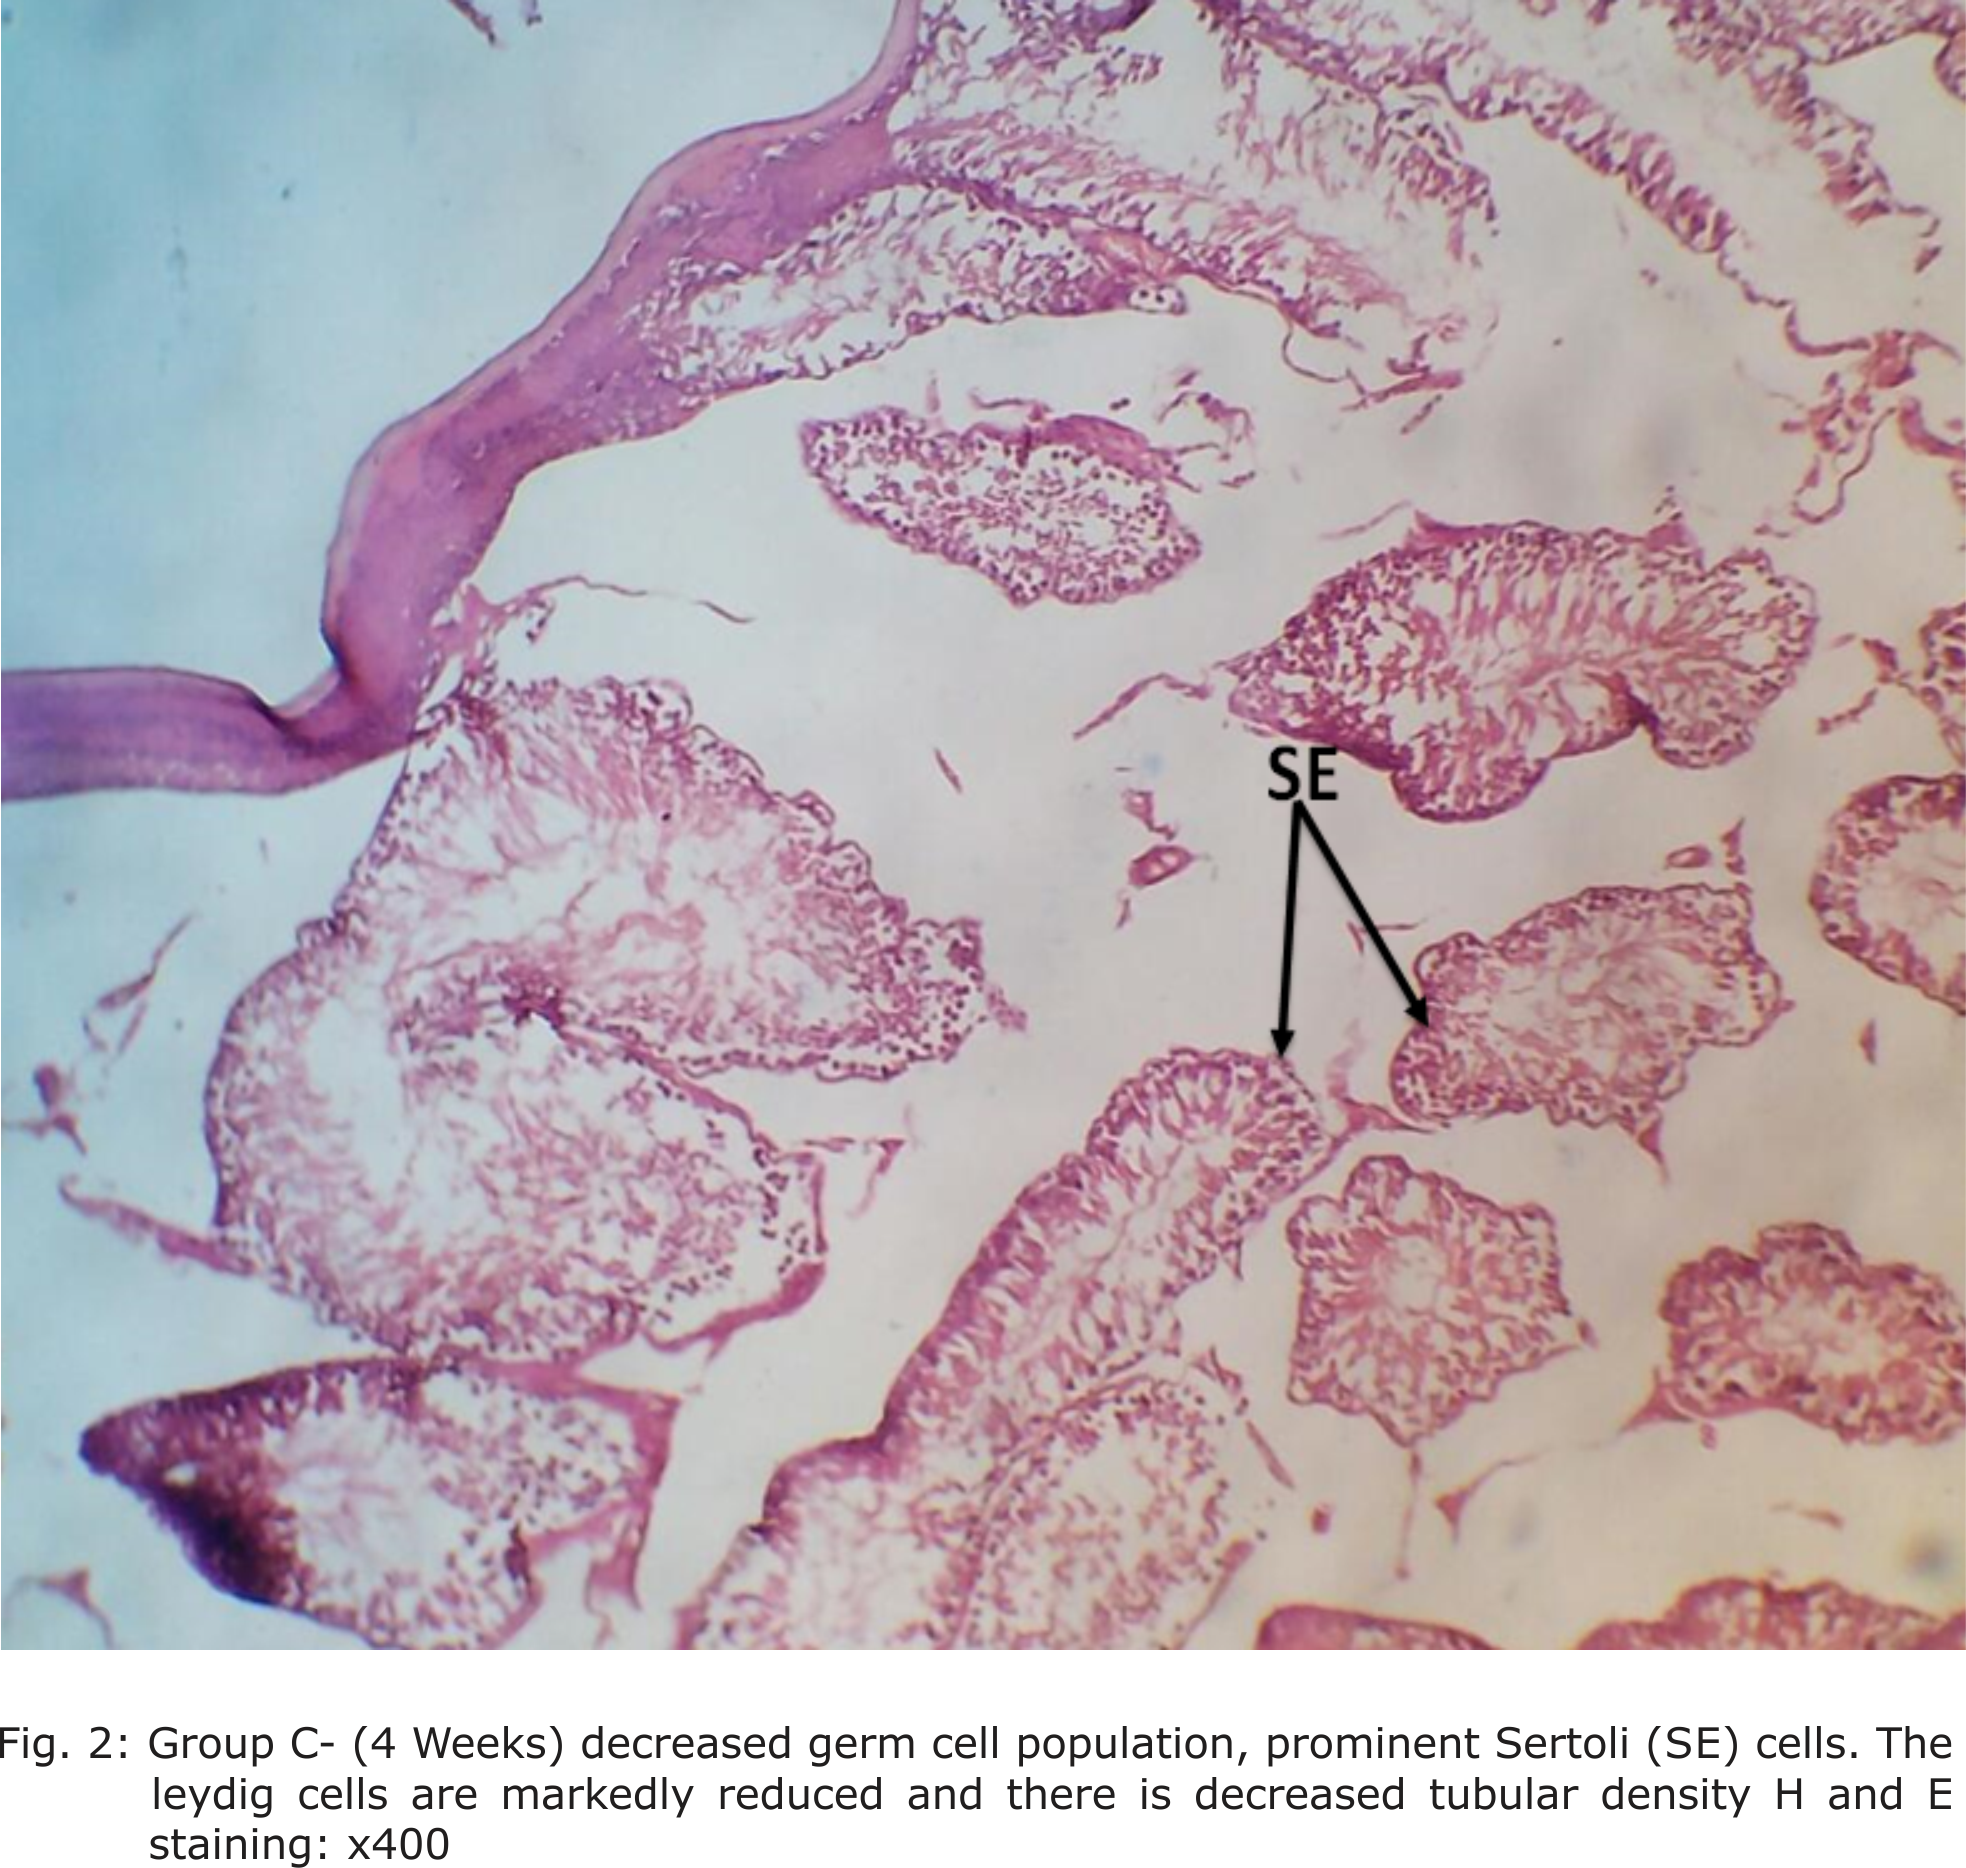 Fig. 2: Group C- (4 Weeks) decreased germ cell population, prominent Sertoli (SE) cells. The leydig cells are markedly reduced and there is decreased tubular density H and E staining: x400